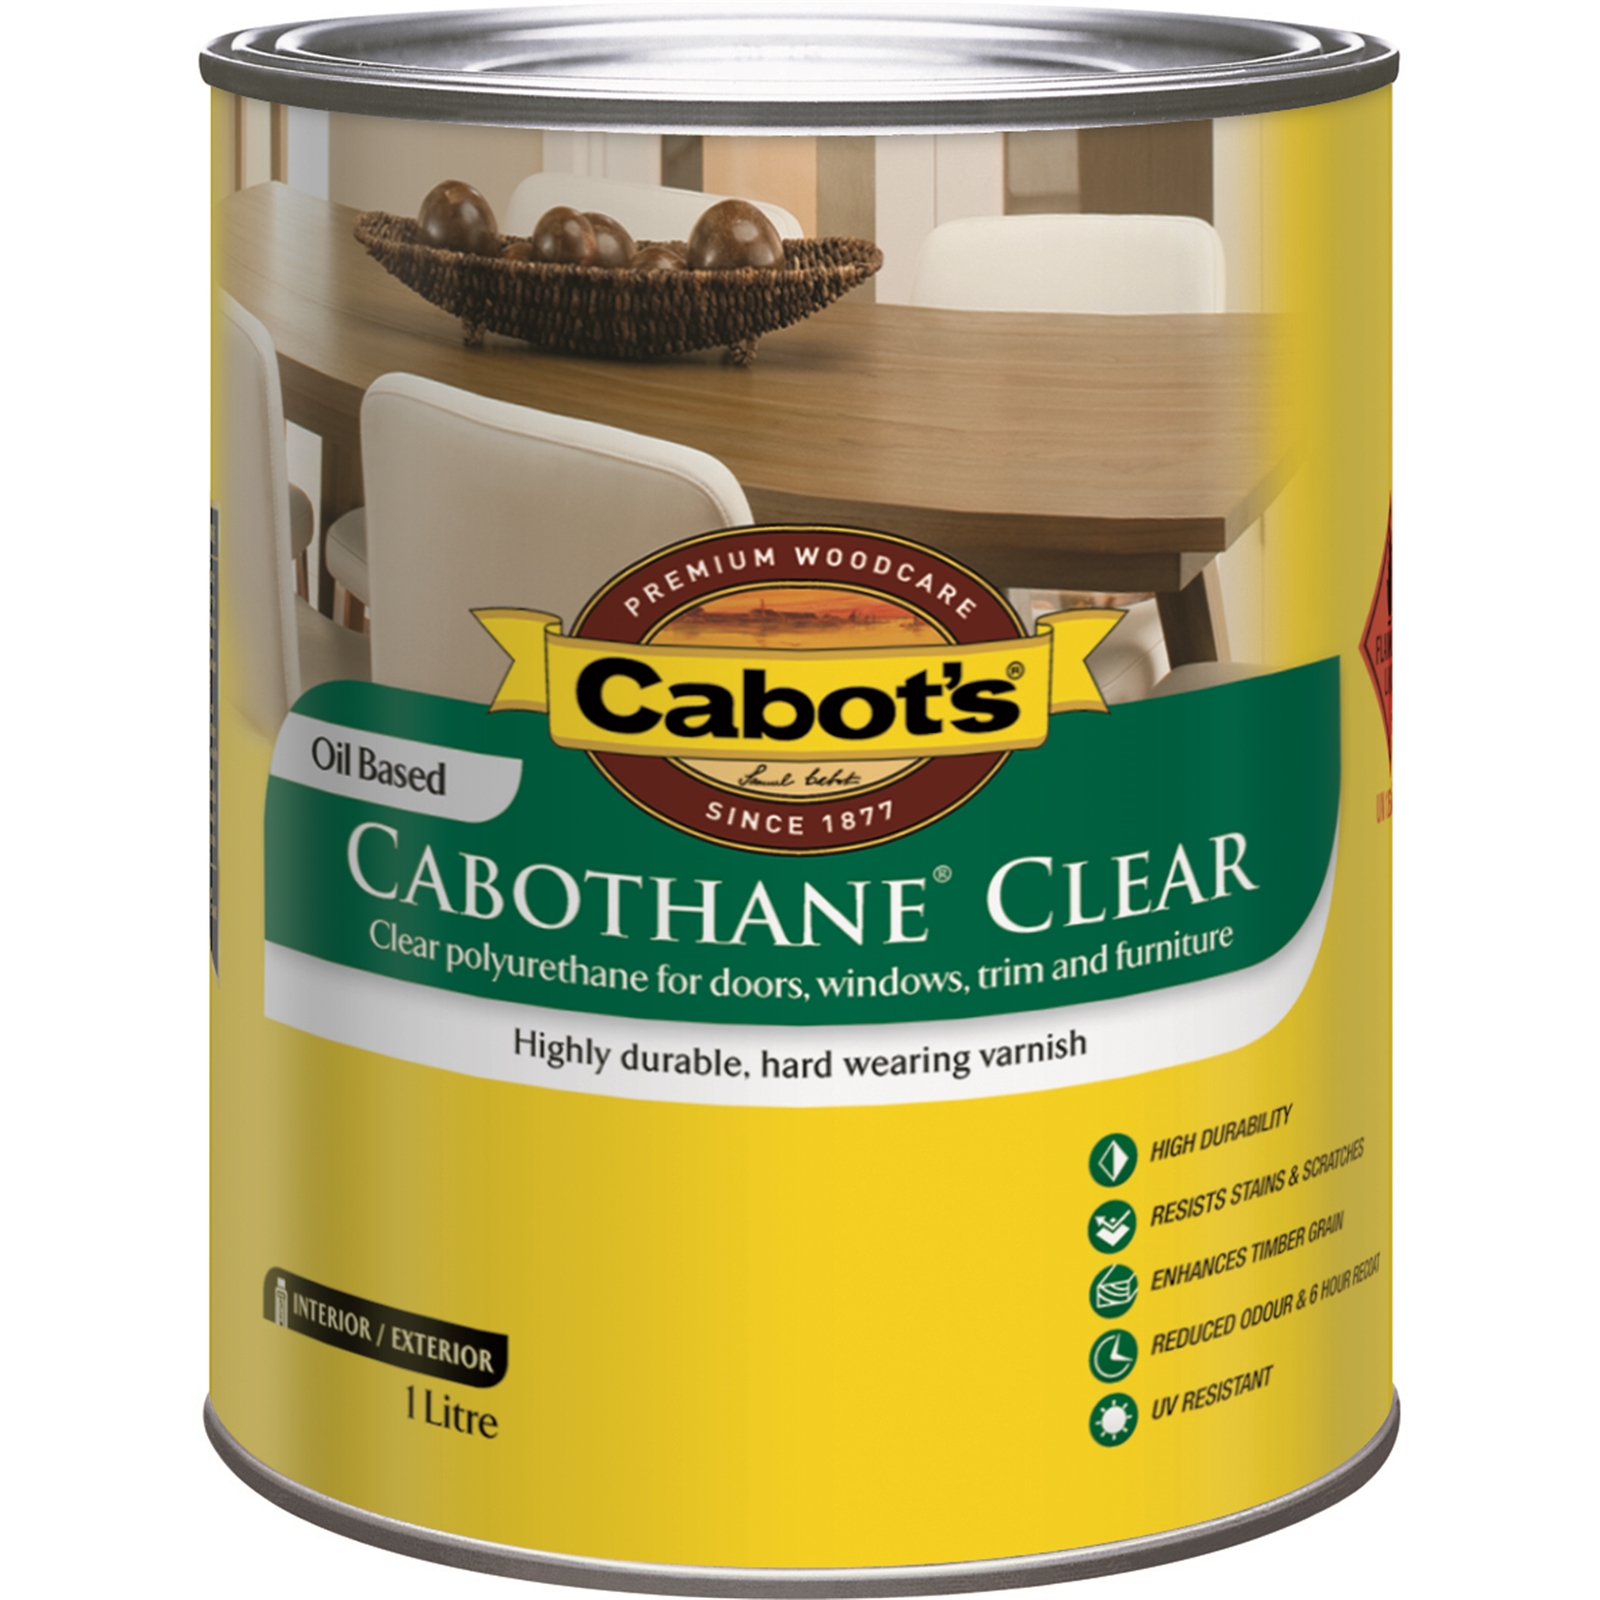 Cabot's 1L Gloss Cabothane Clear Oil Based Timber Varnish